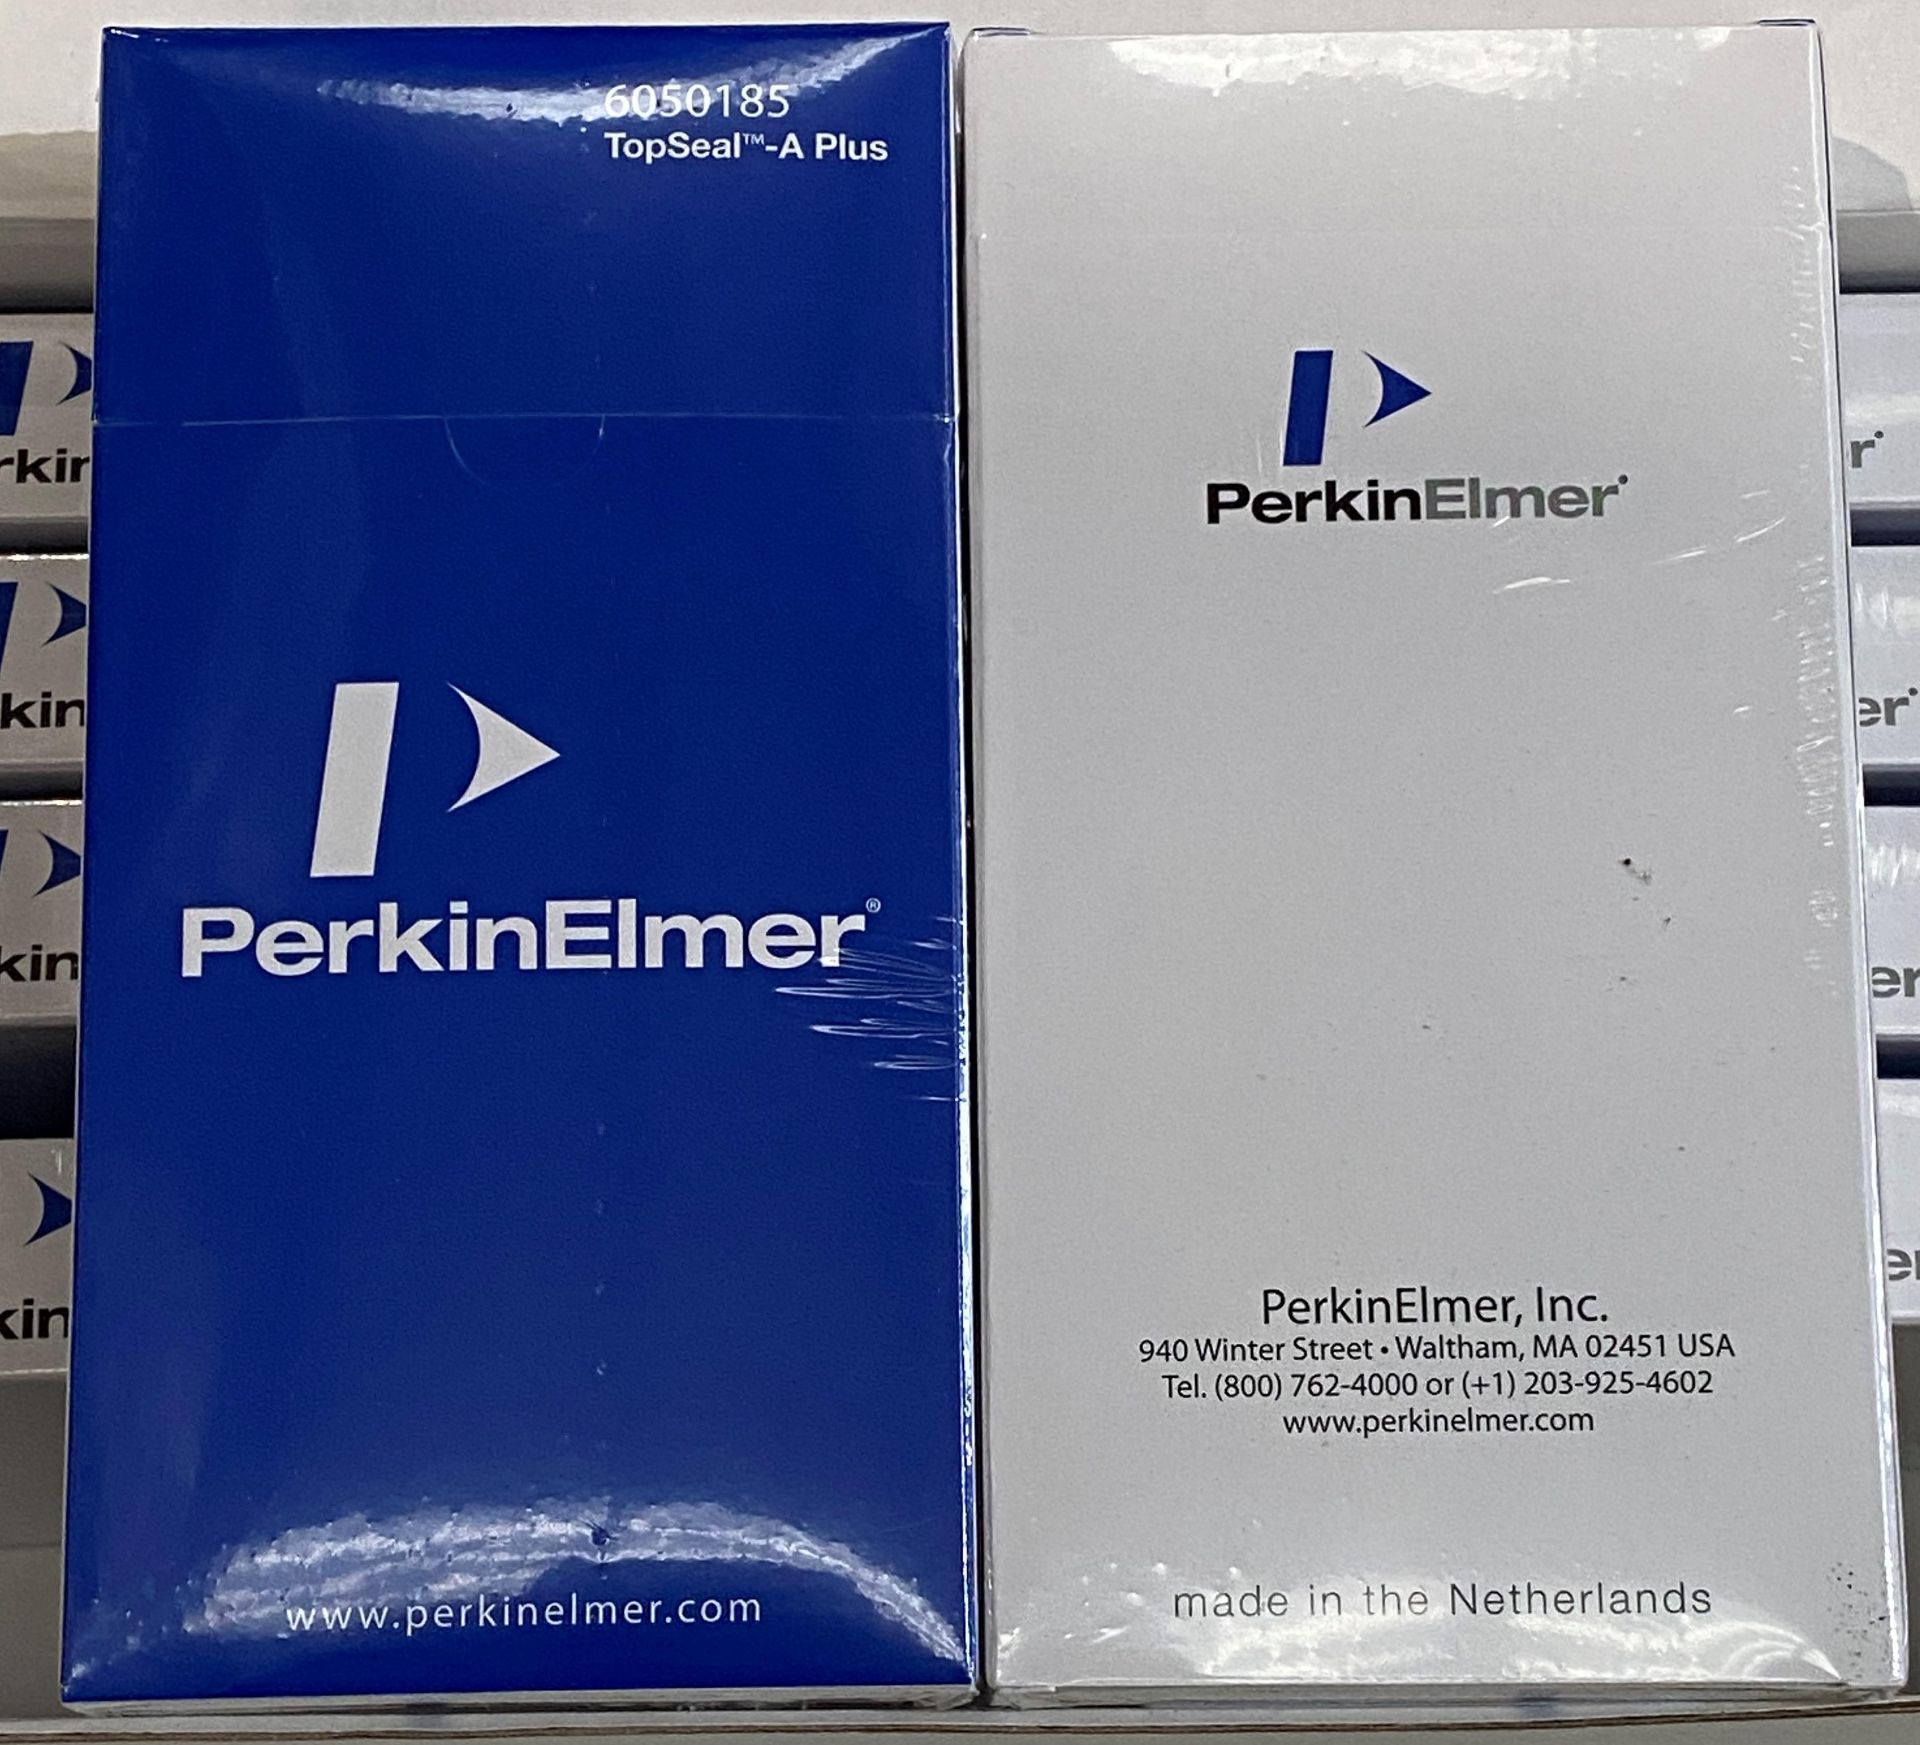 400 x Packs of PerkinElmer Top Seal - A Plus 6050185 clear adhesive microplate seals - 100 units